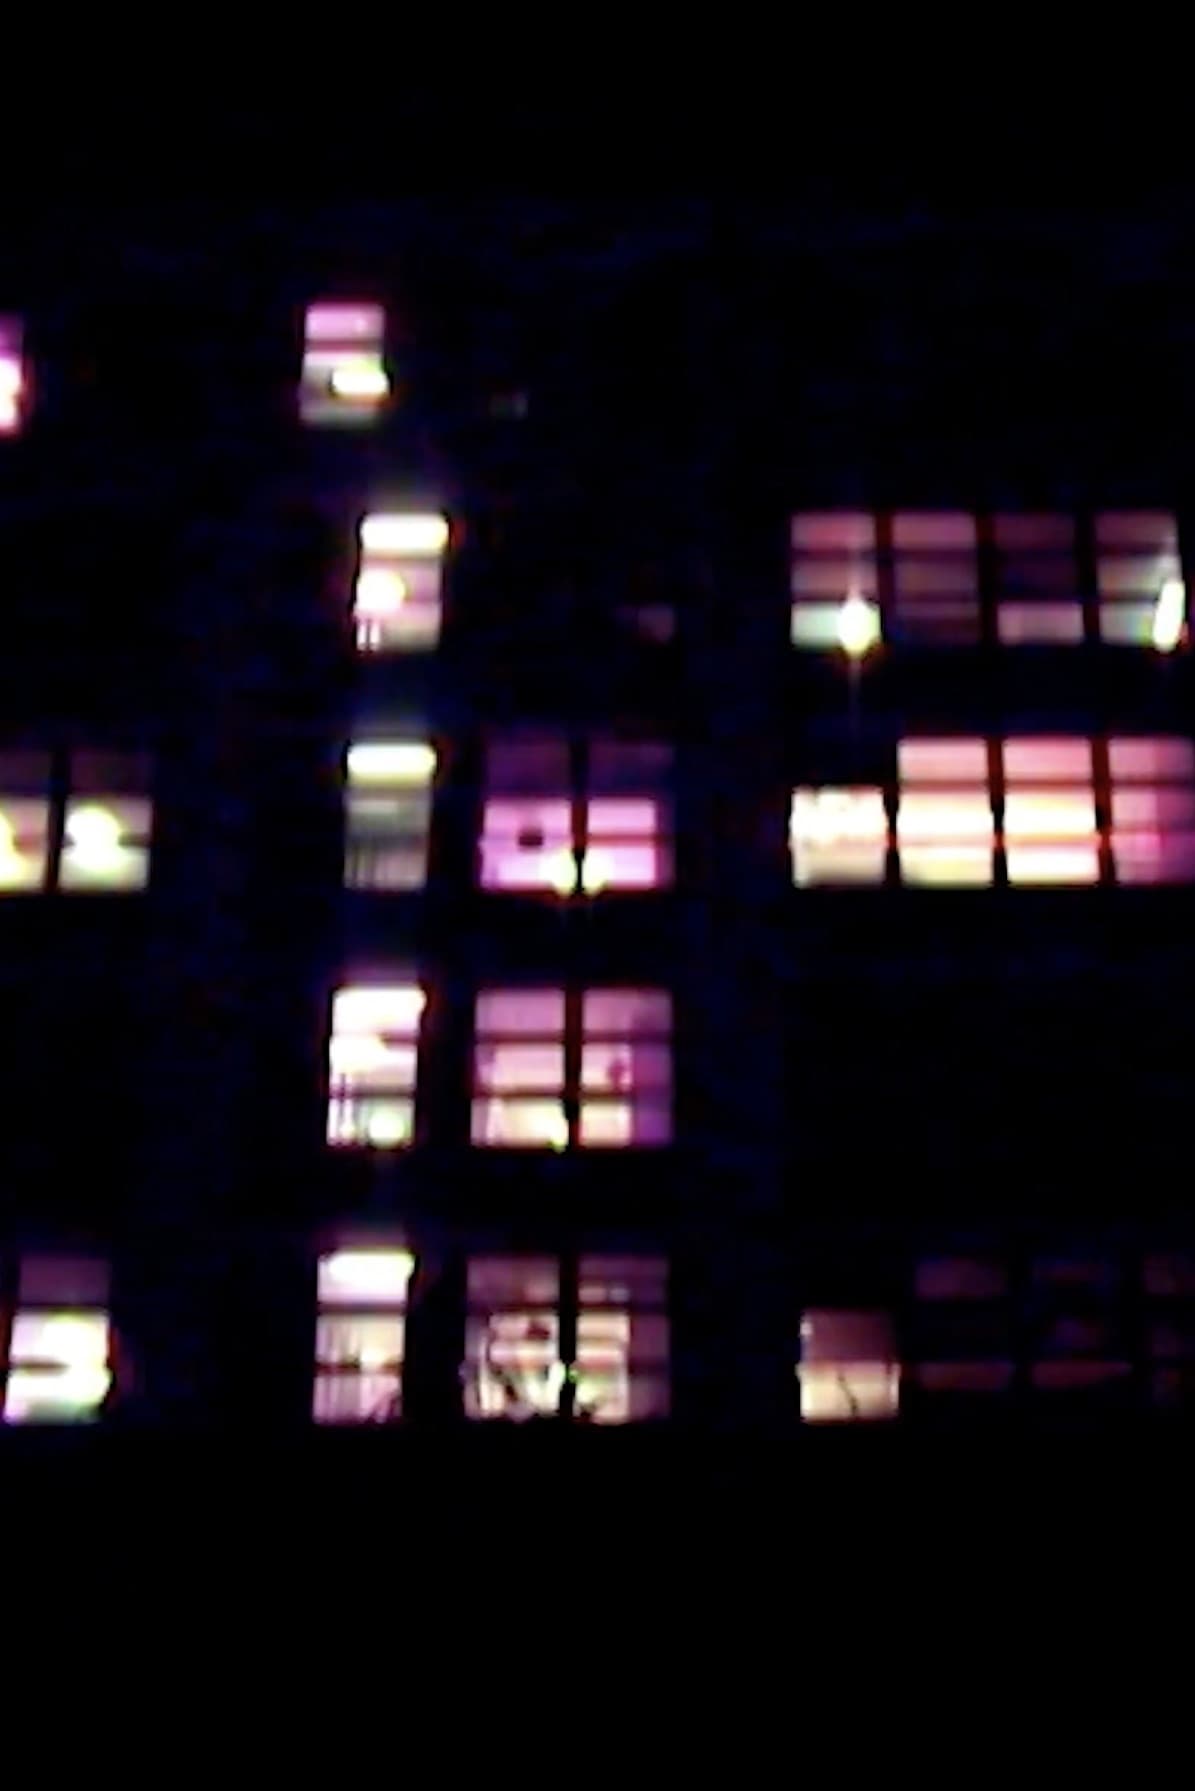 from my kitchen window the building was blinking